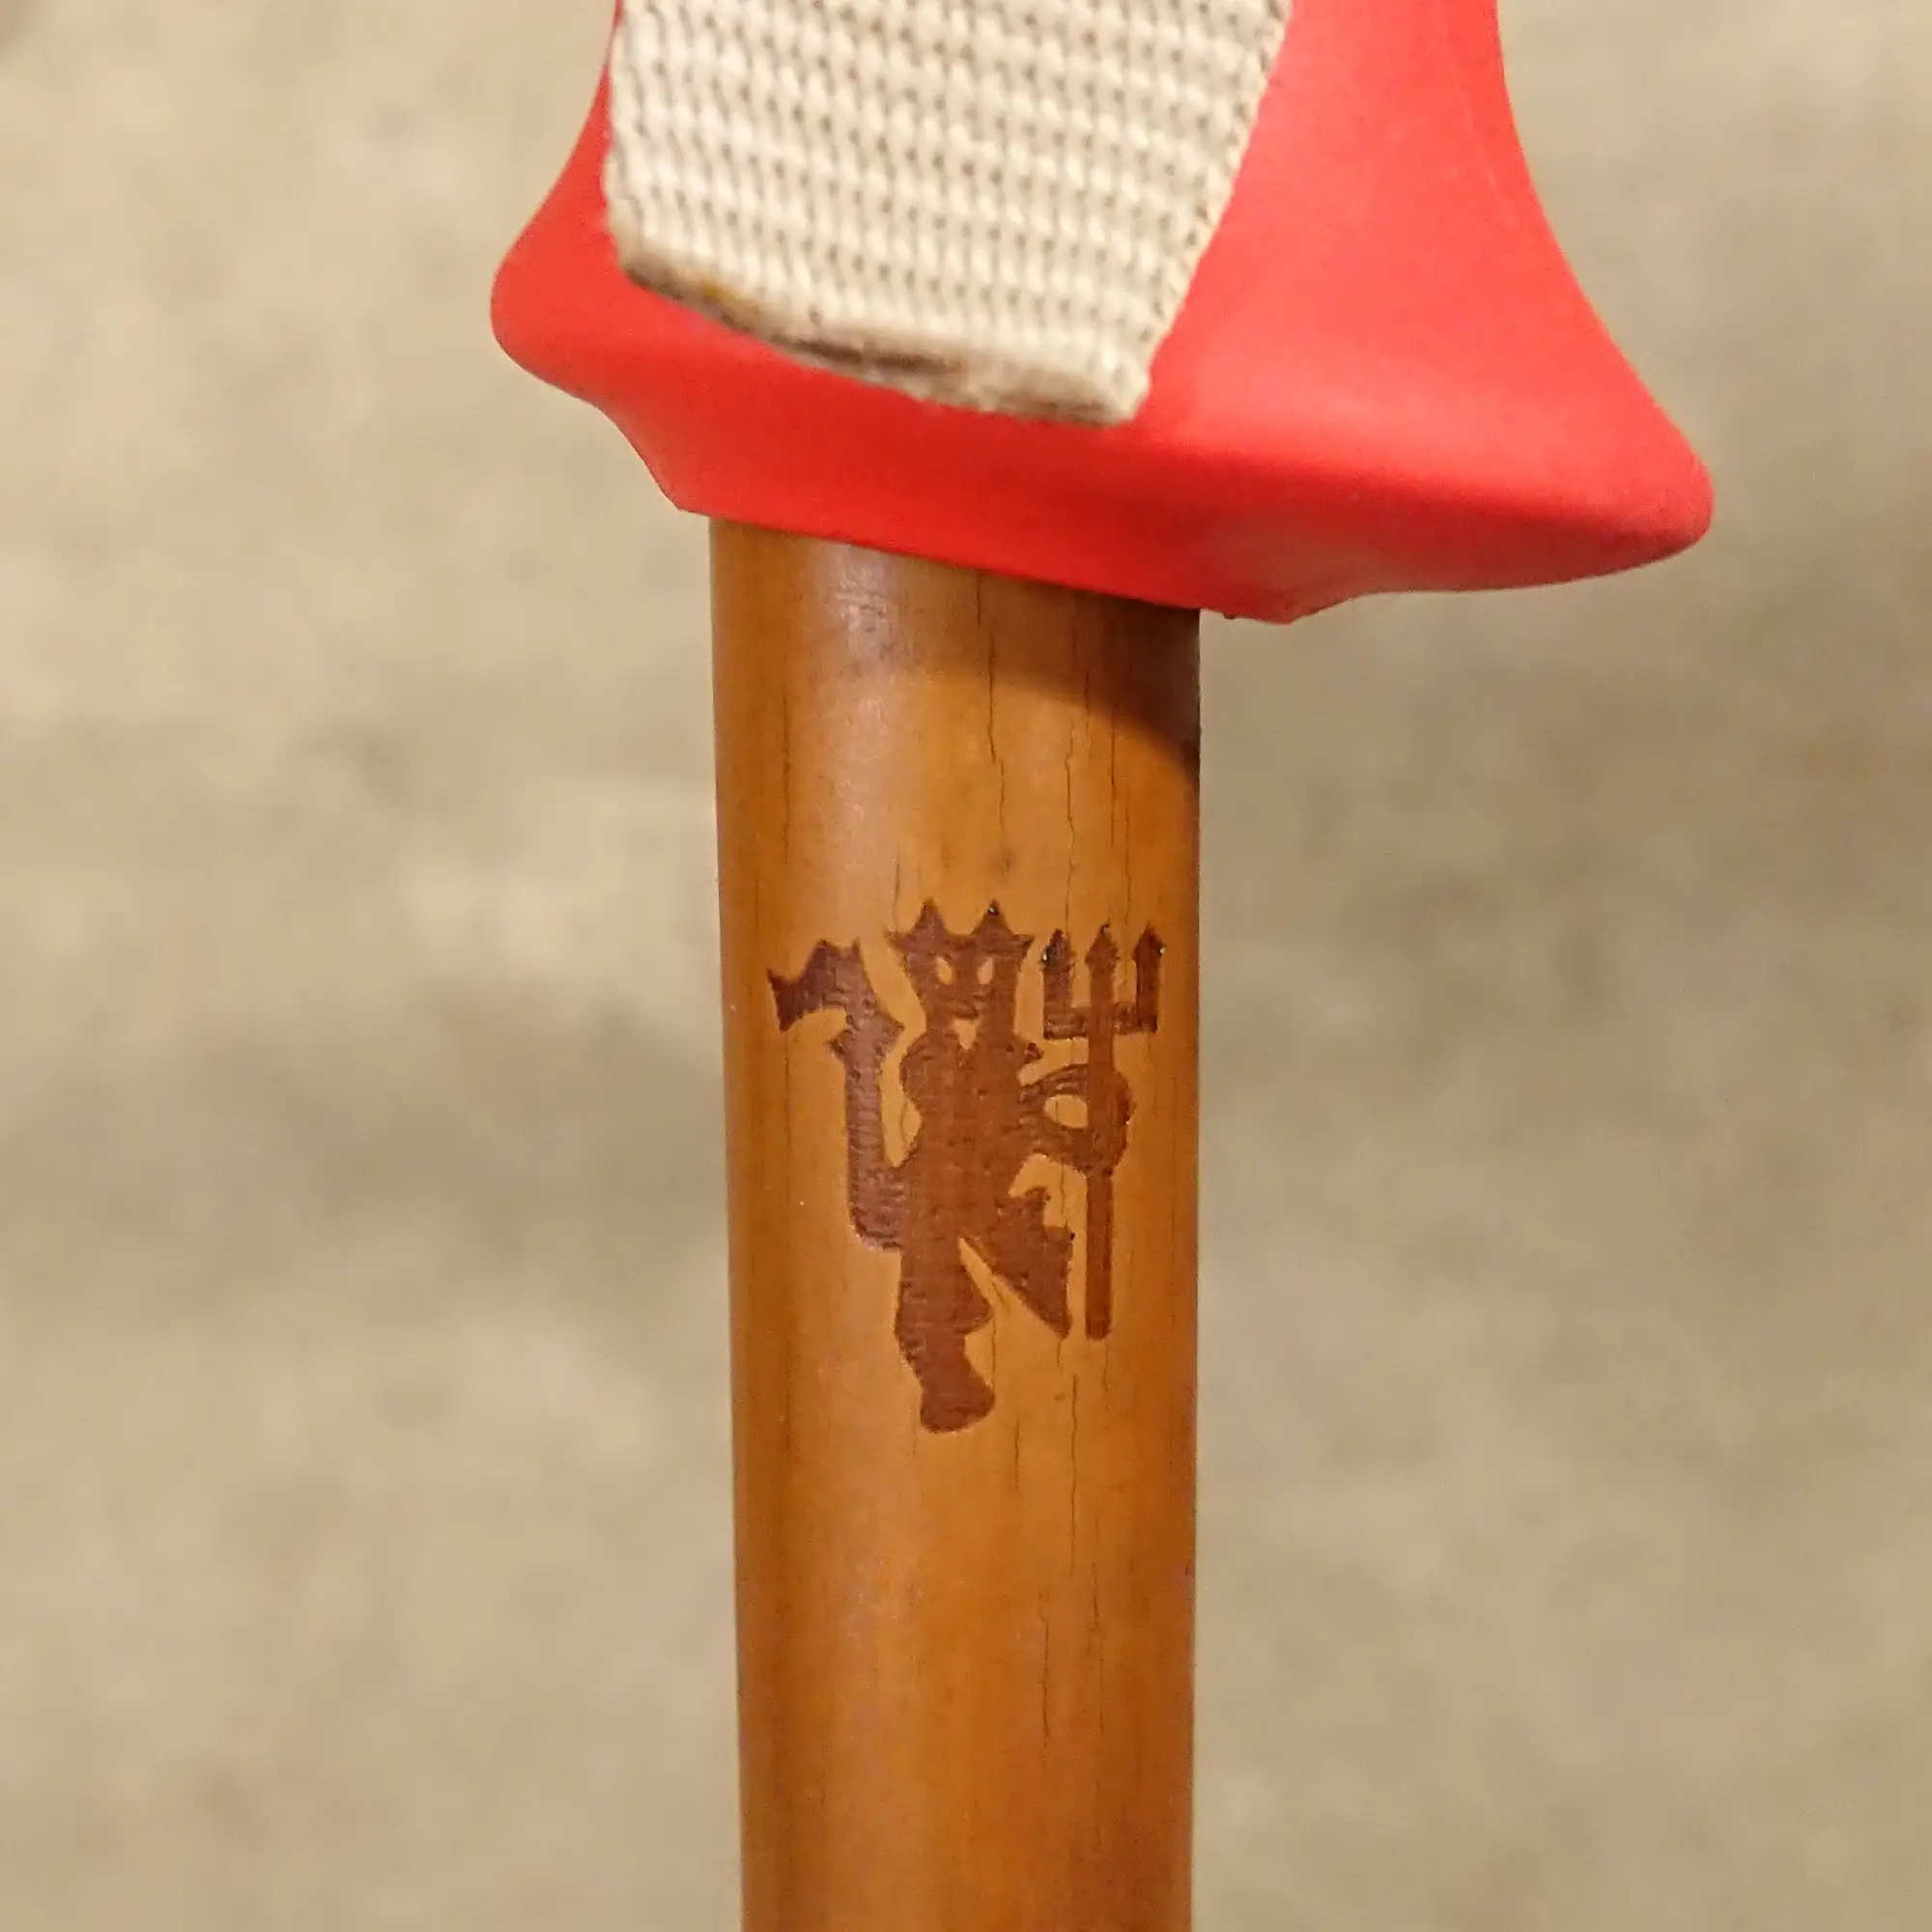 Dark bamboo ski pole with Manchester United red devil engraving.